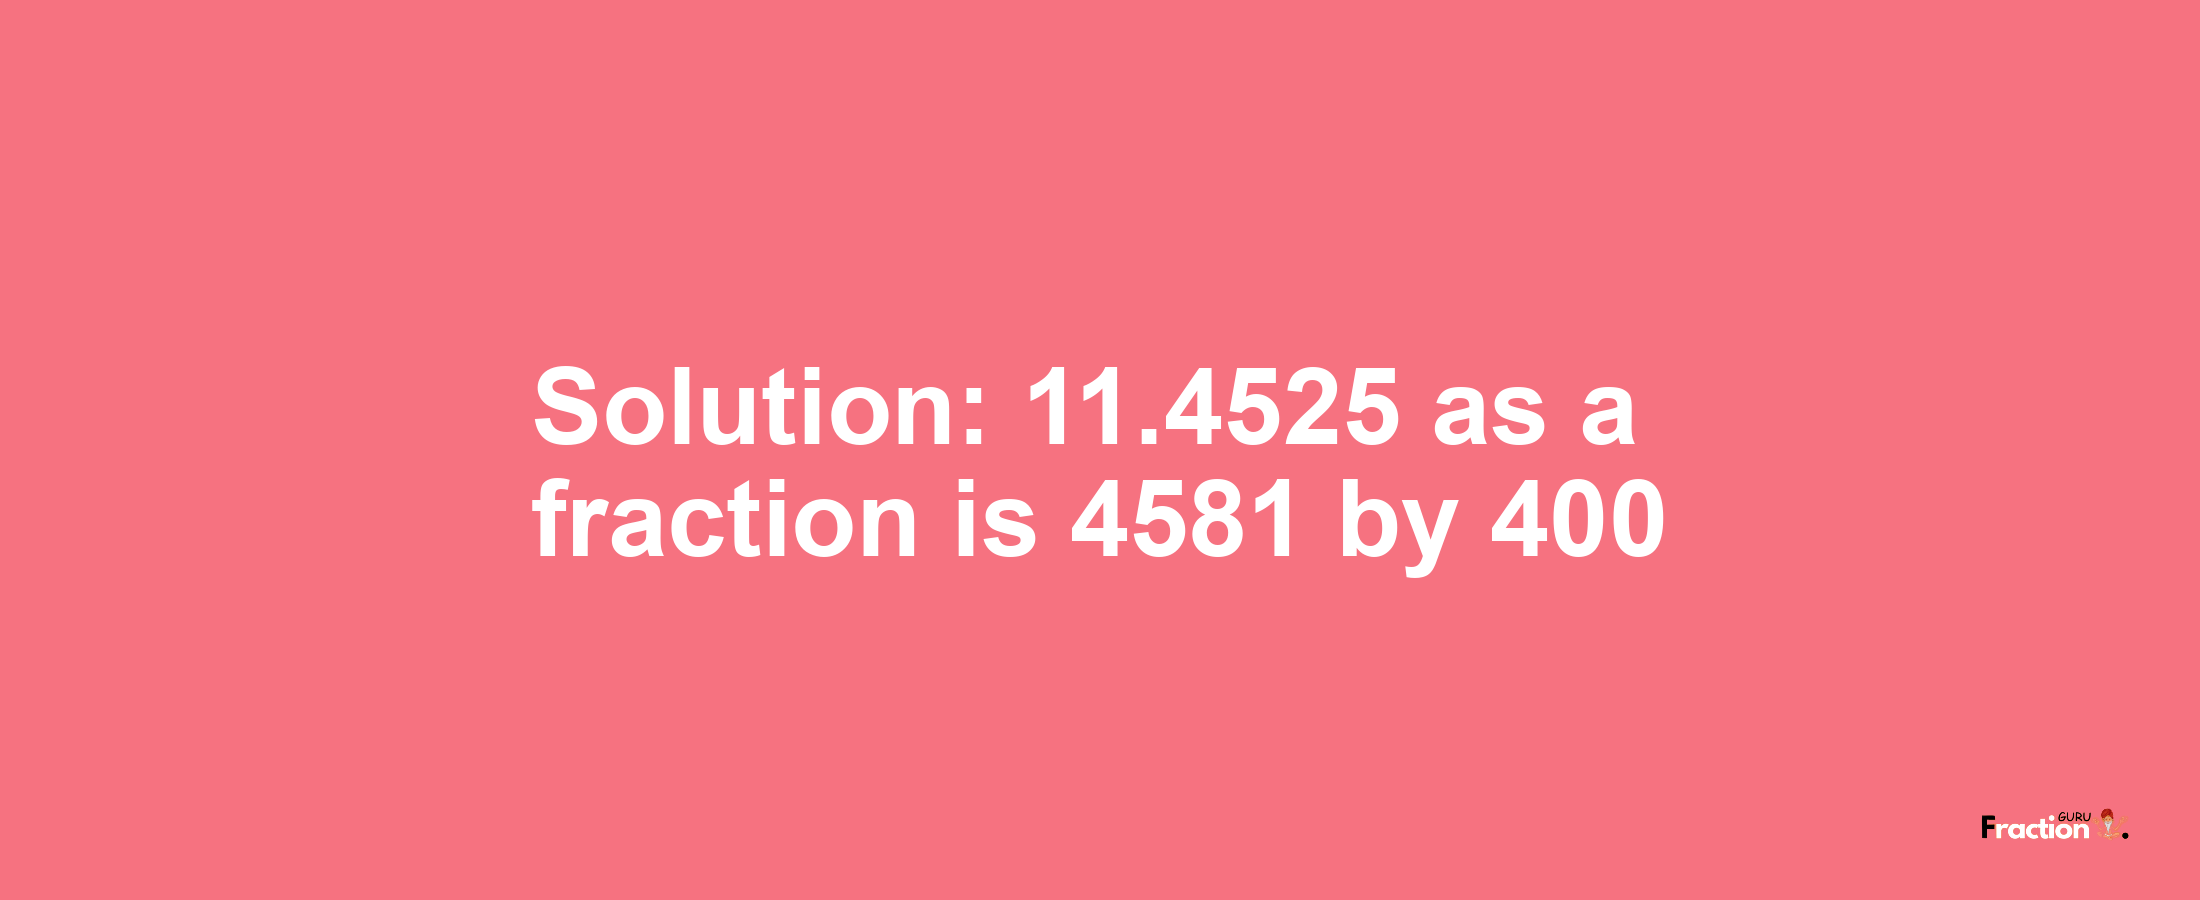 Solution:11.4525 as a fraction is 4581/400